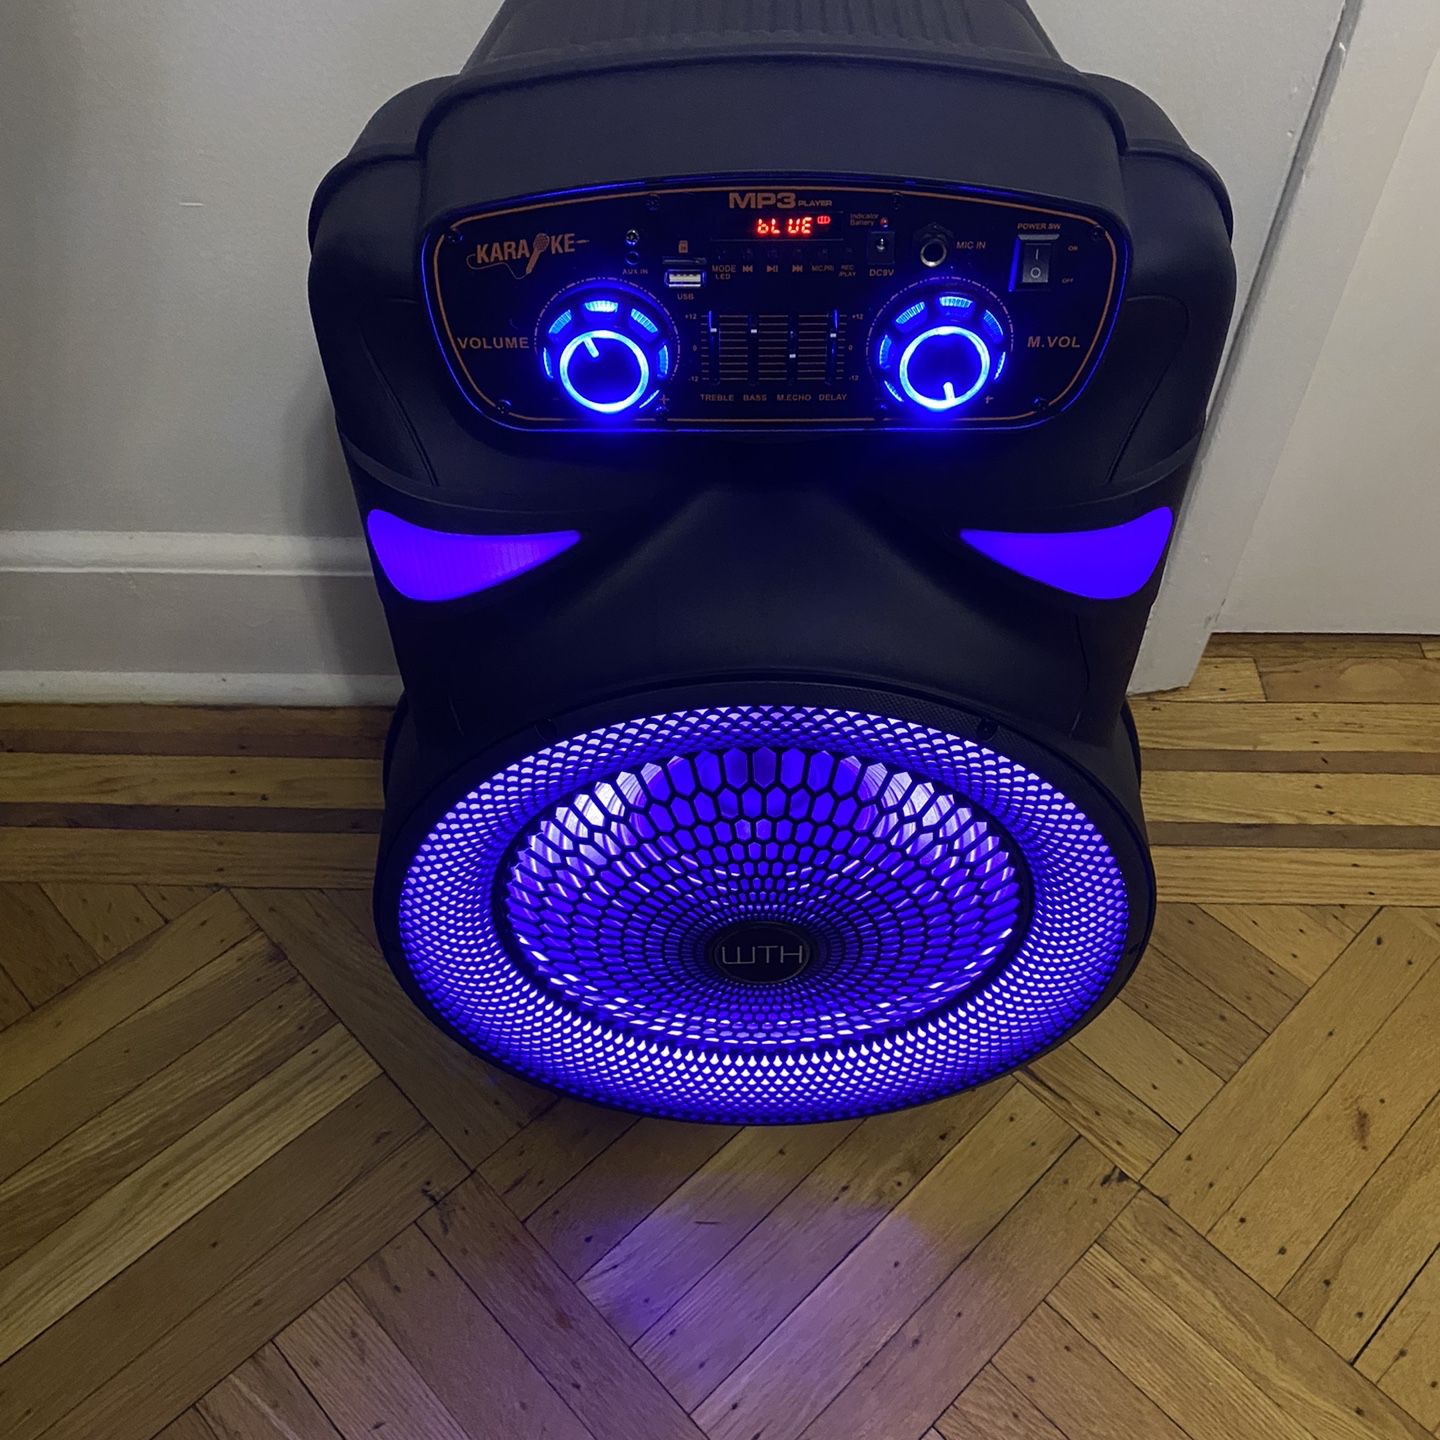 15 Inch RGB Party Speaker With a Stand.